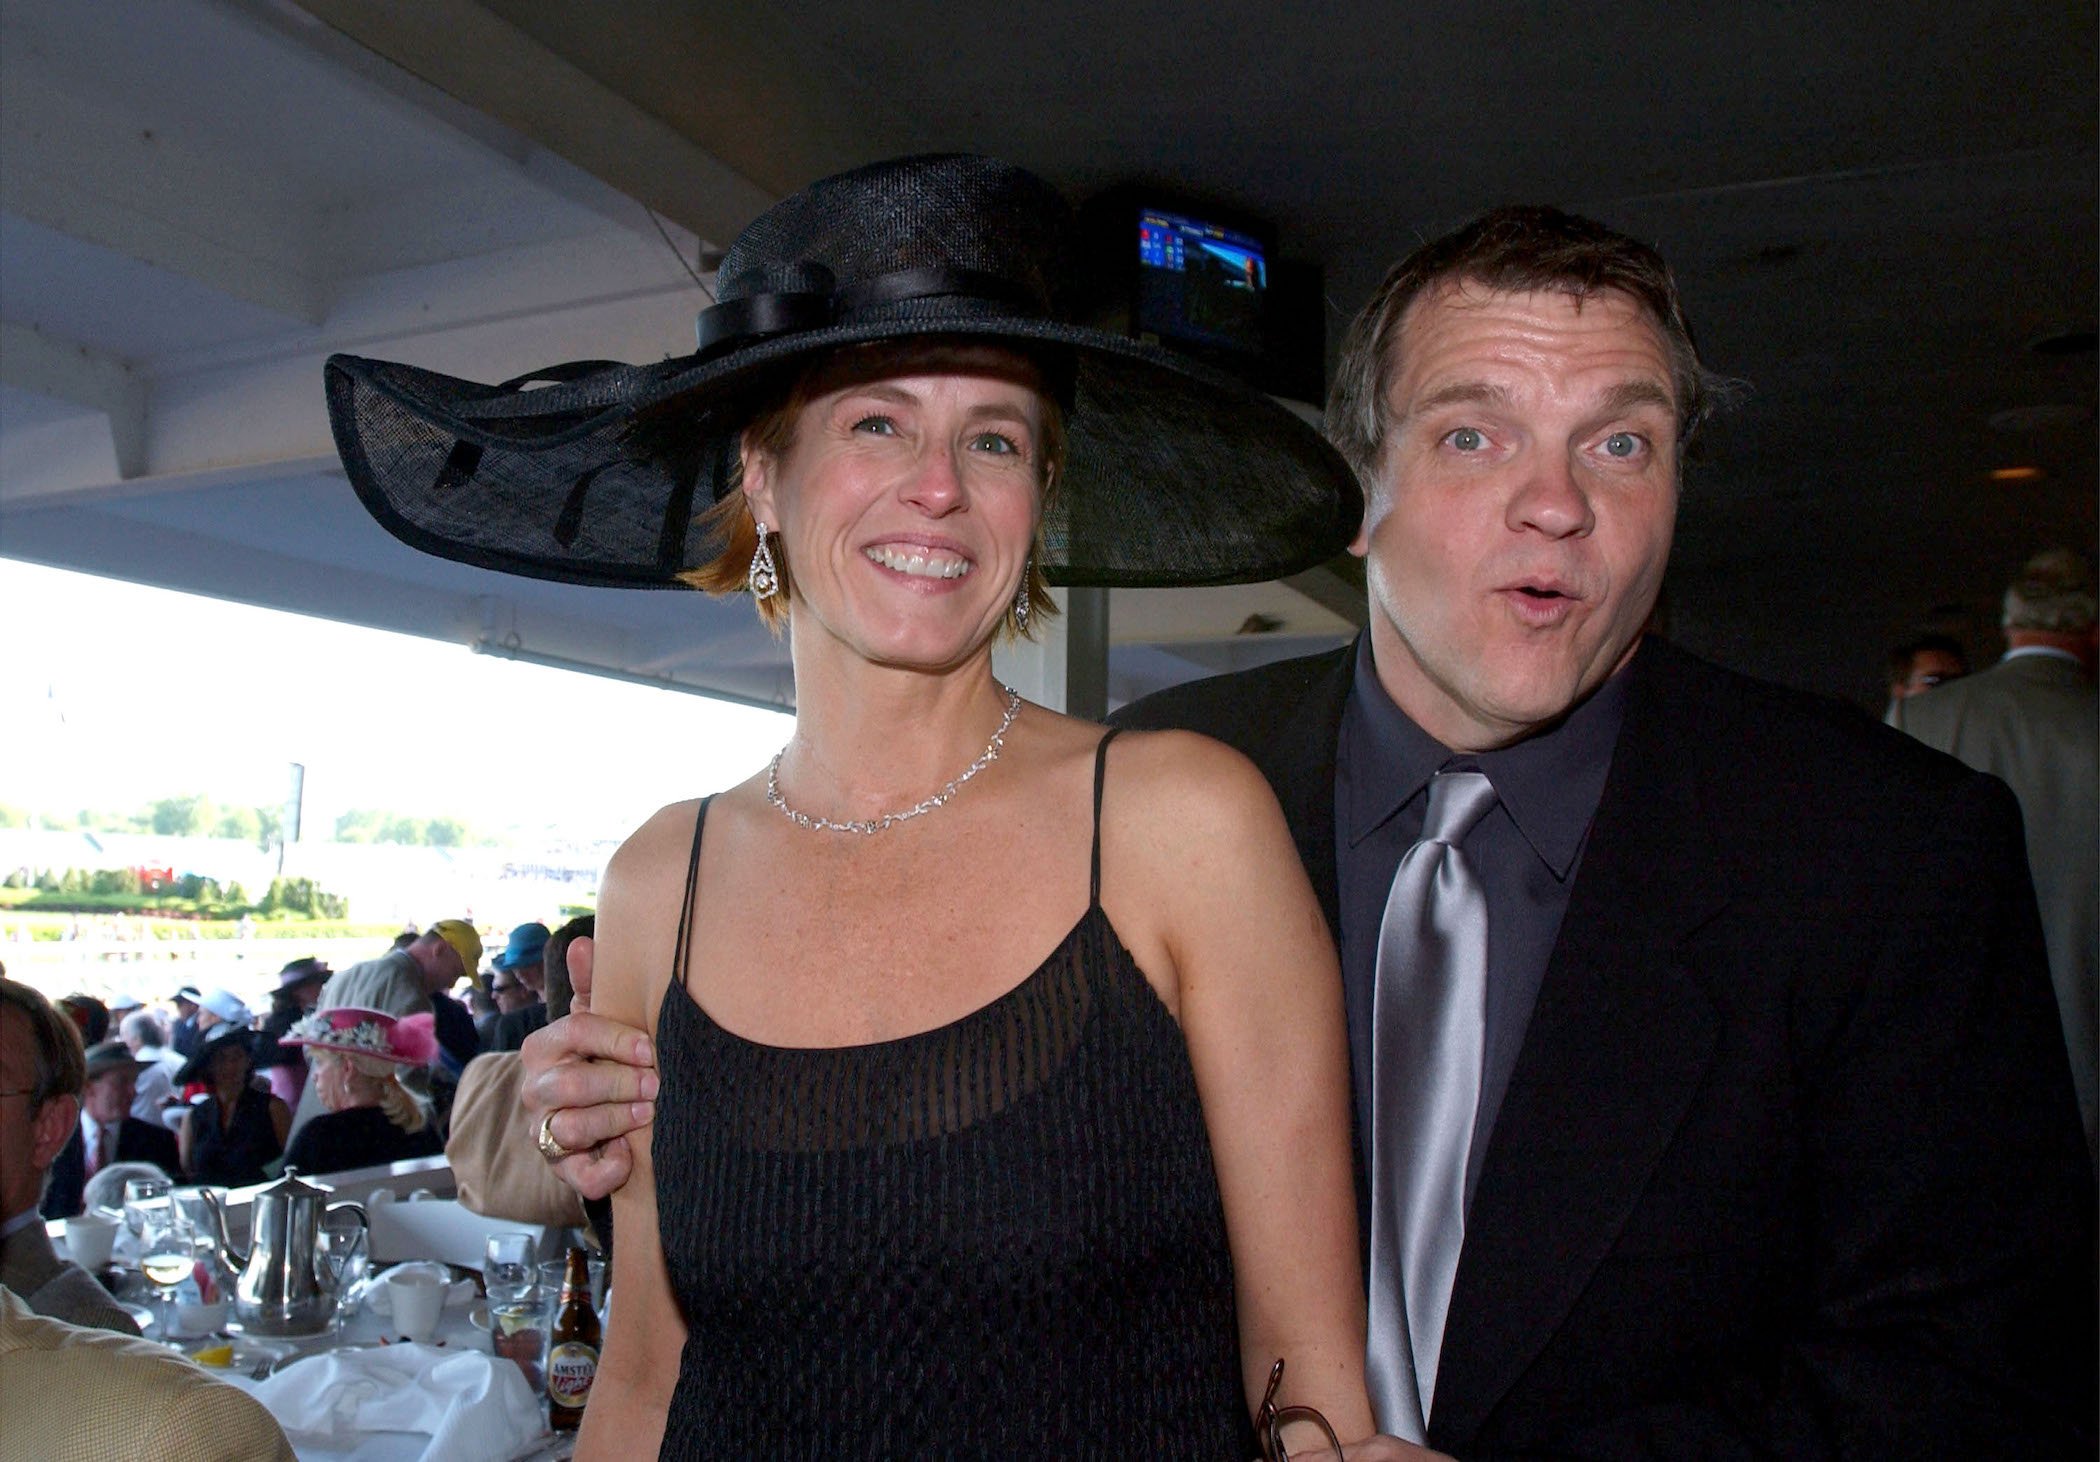 Meat Loaf and wife Deborah Gillespie standing together and smiling at an event